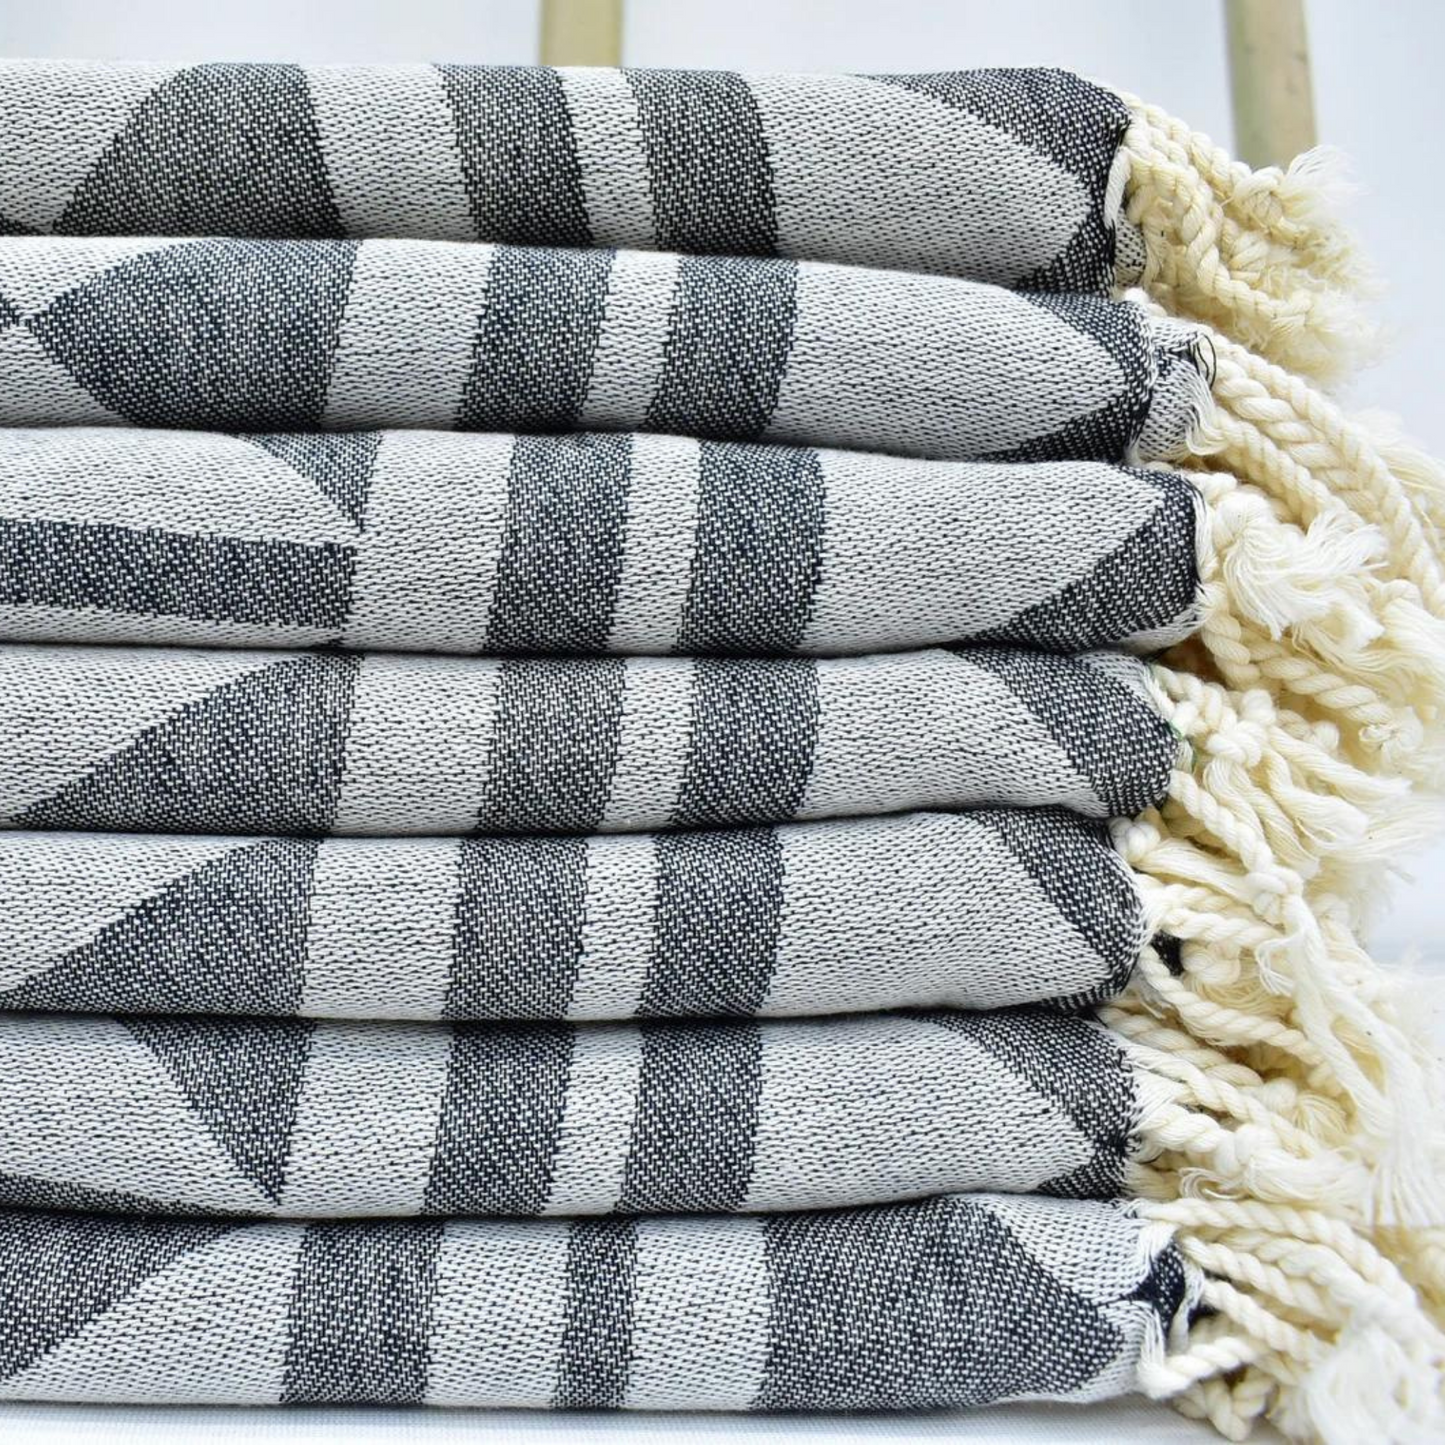 Stacked URBAN Turkish Towels with grey geometric patterns